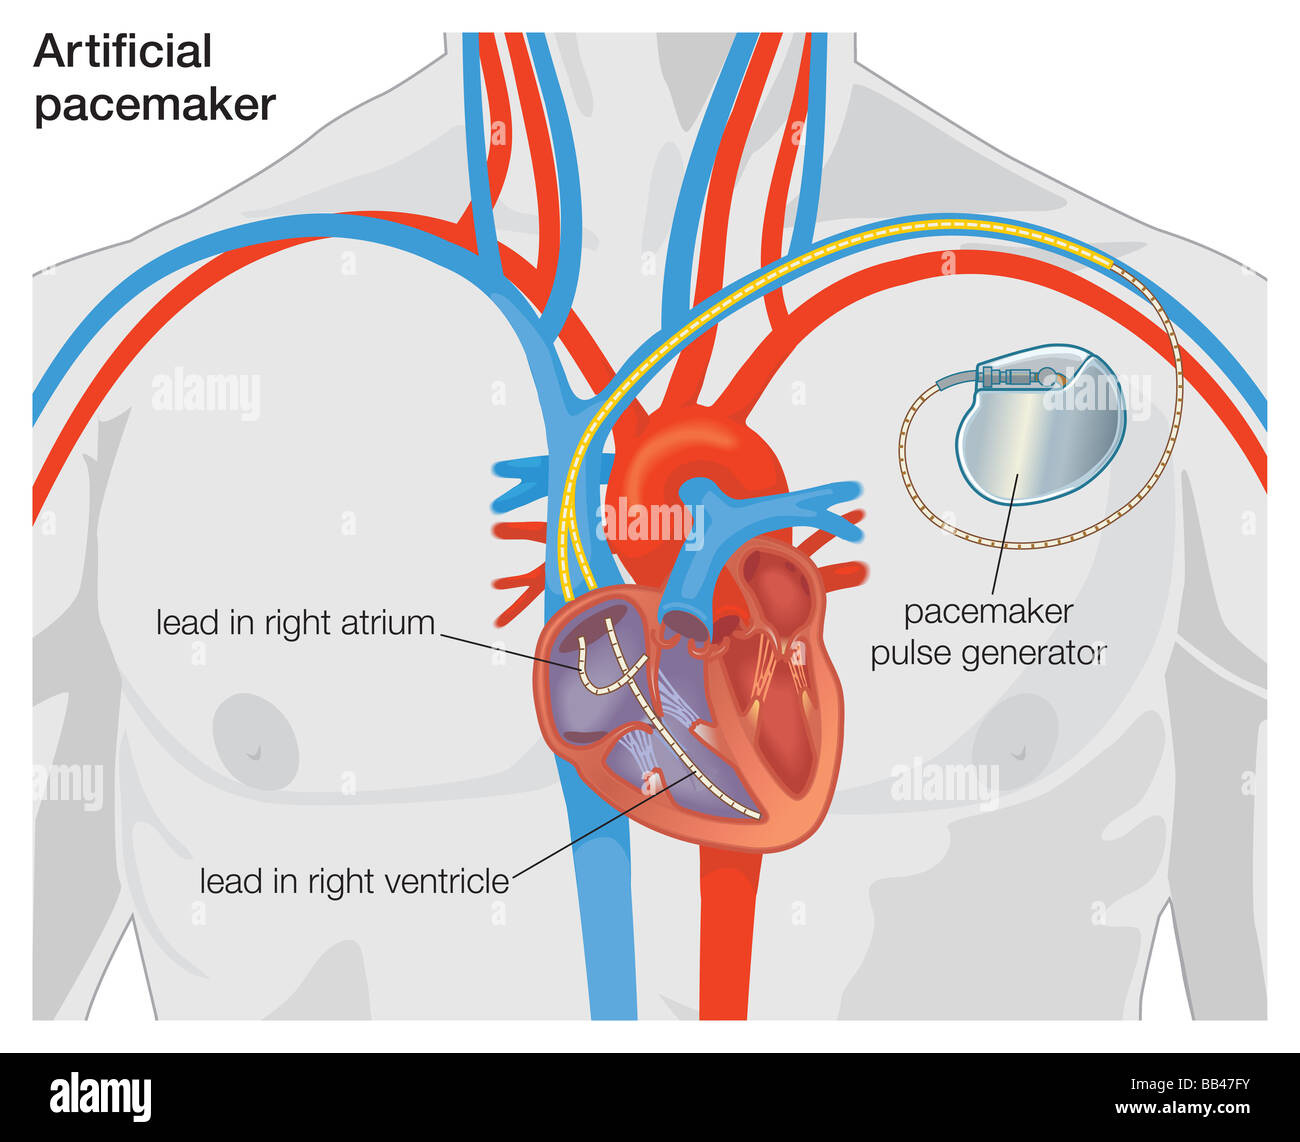 Diagram Of An Artificial Pacemaker Stock Photo Royalty Free Image